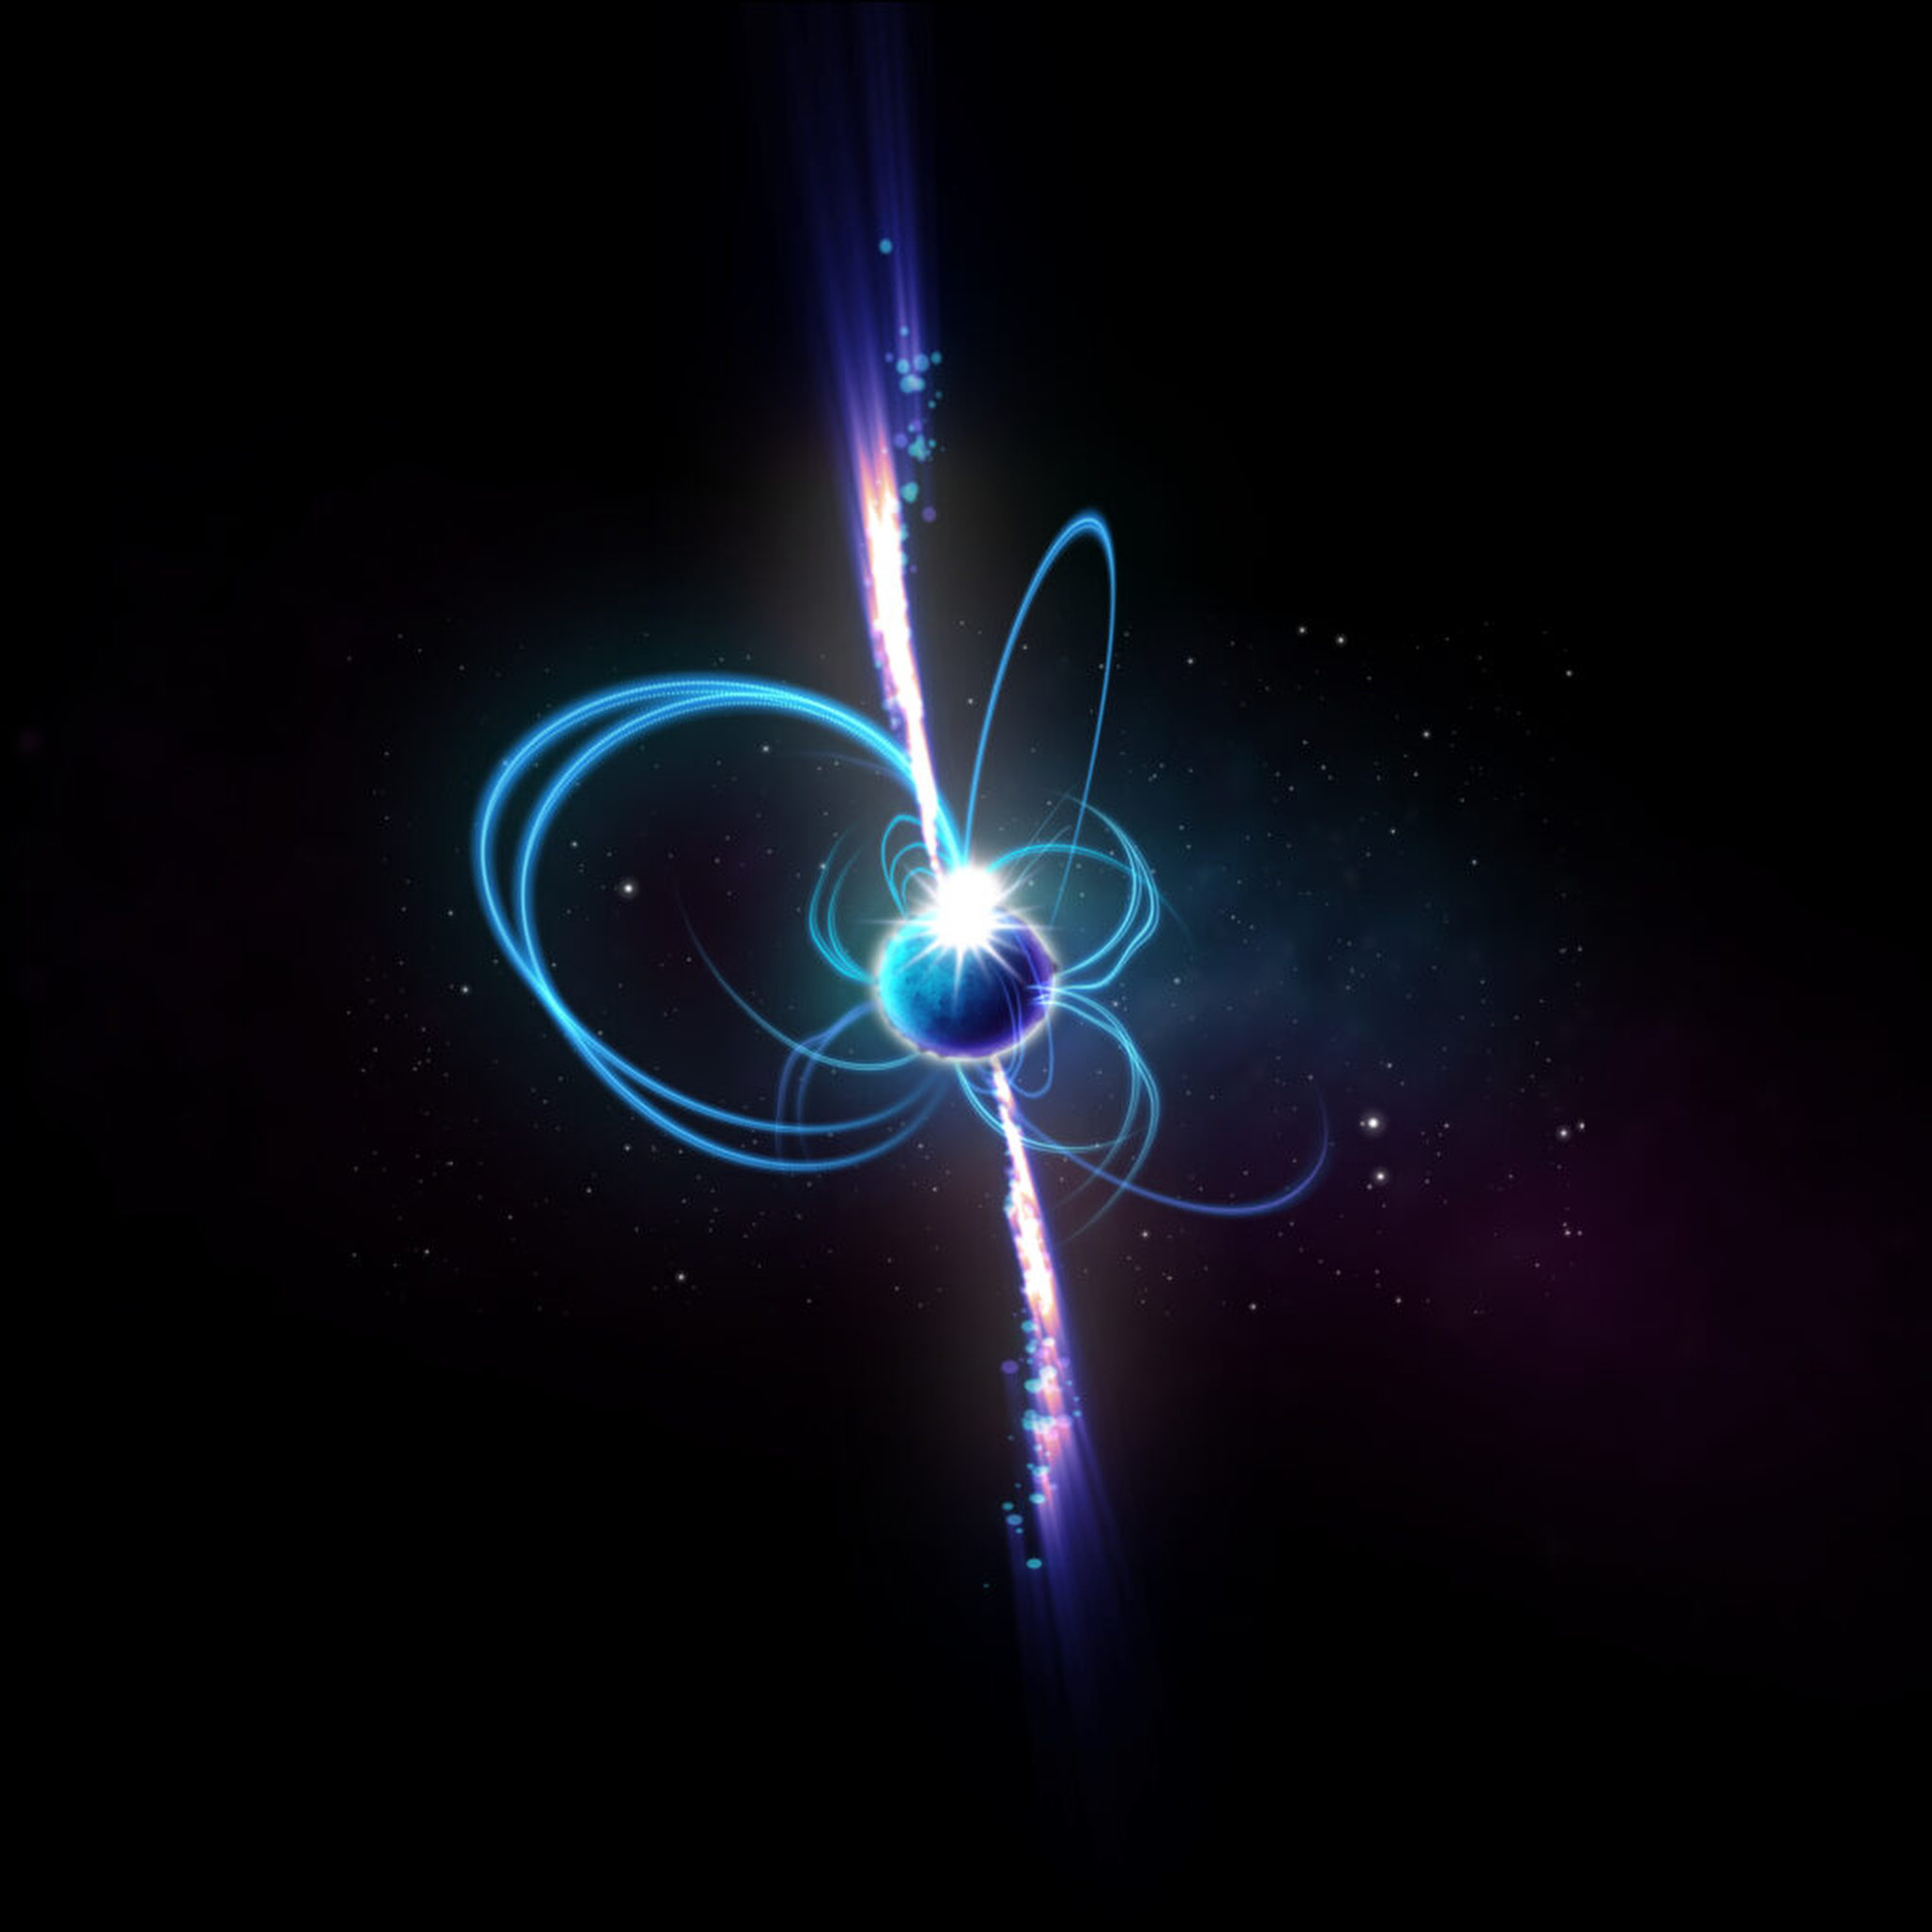 An artist’s impression of what the object might look like if it is a magnetar – an incredibly magnetic neutron star. Photo: ICRAR.